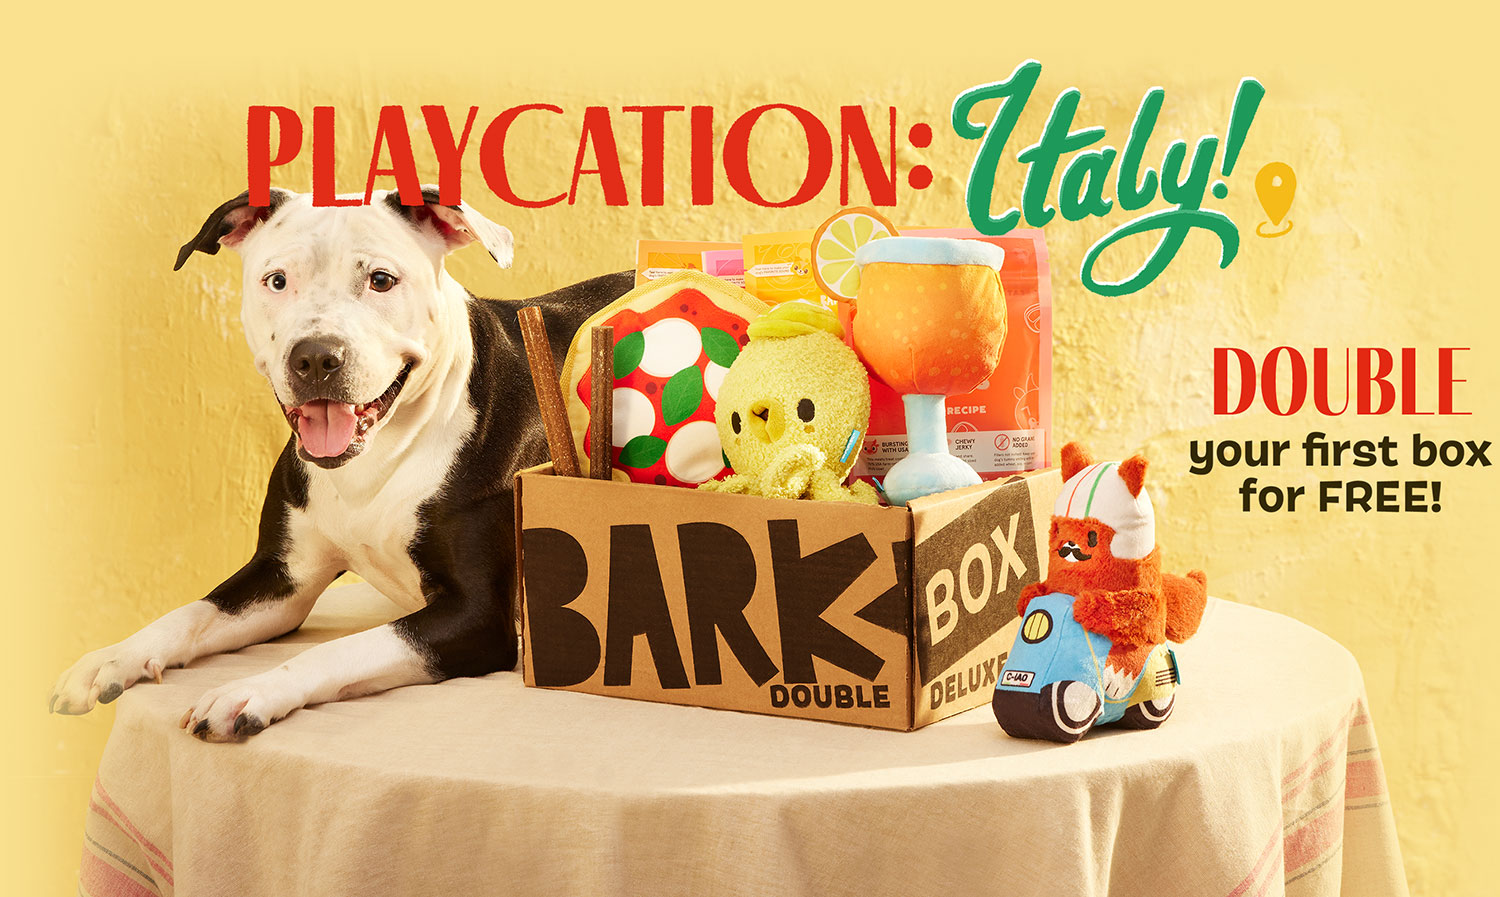 PLAYCATION: Italy! Double your first box for FREE!